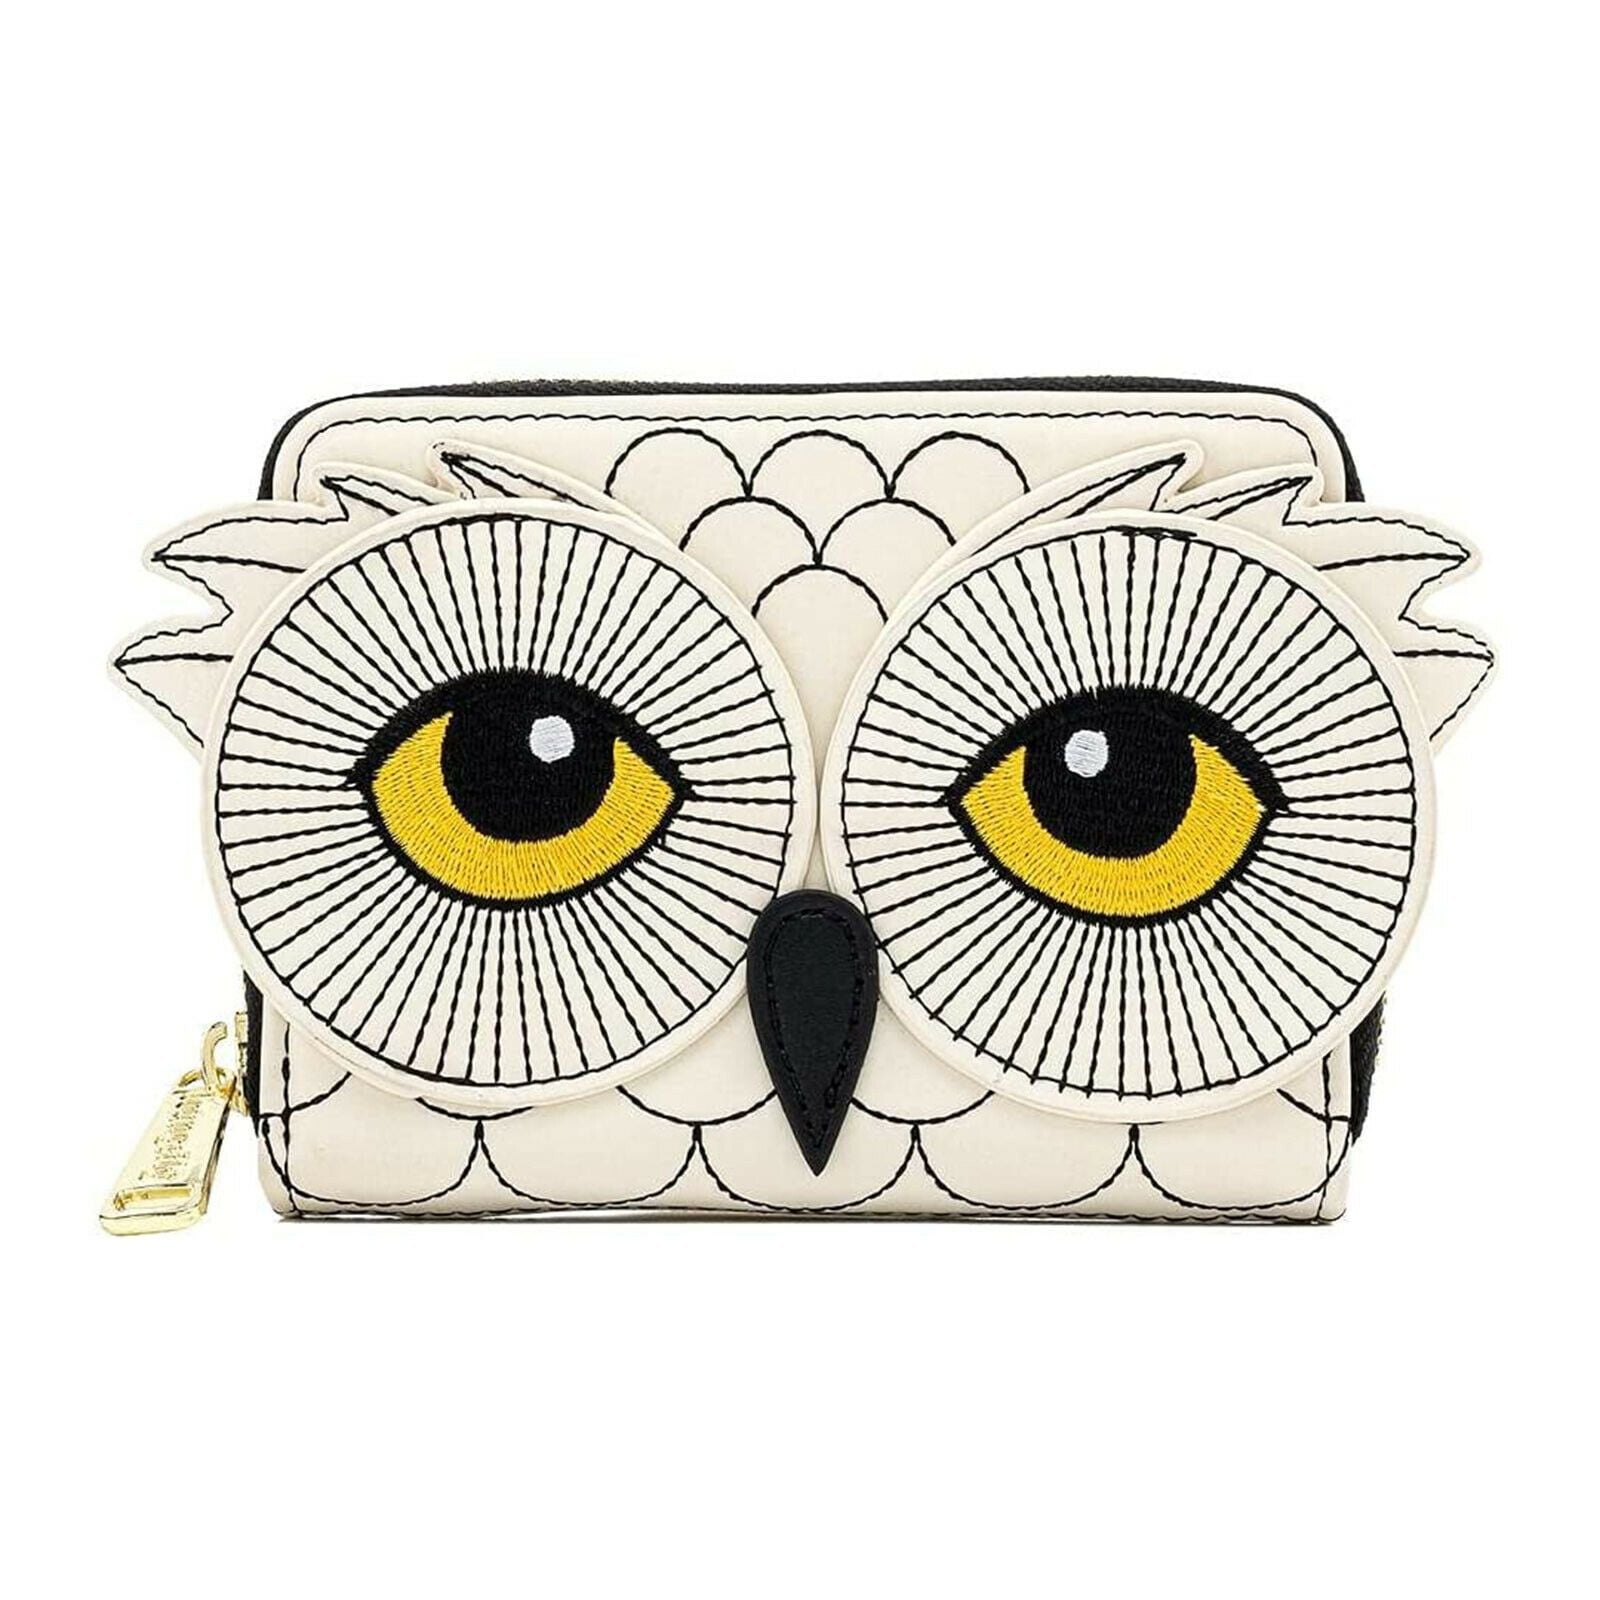 New Harry Potter Hedgwig Sparkly Owl Purse Womens Girls Primark 